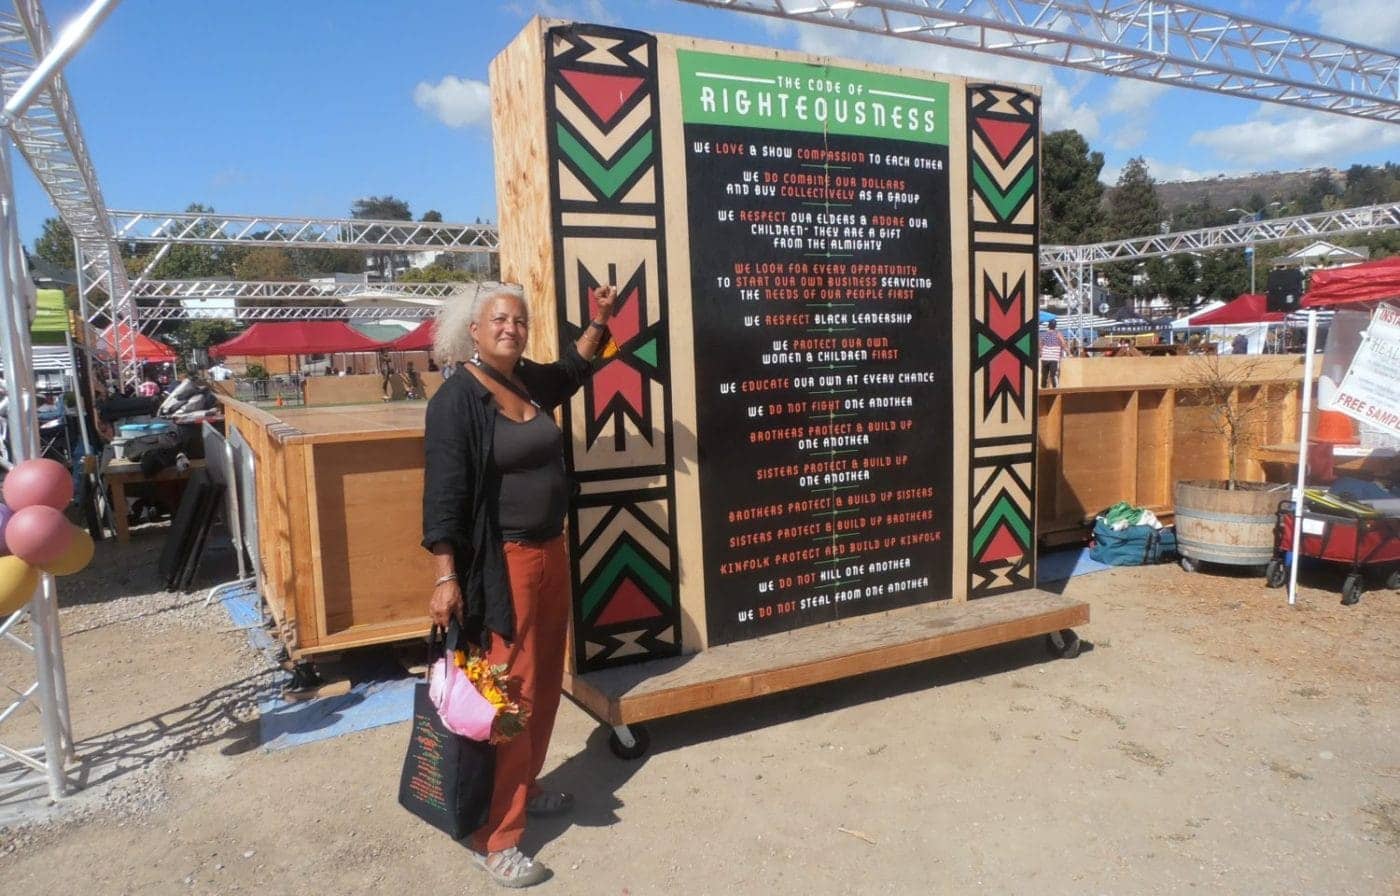 Elana-Serrano-at-The-Code-of-Righteousness-at-the-Akoma-Market-in-East-Oaklands-new-Liberation-Park-by-Jahahara-1400x896, End corporate-military genocide and ecocide!, Culture Currents 